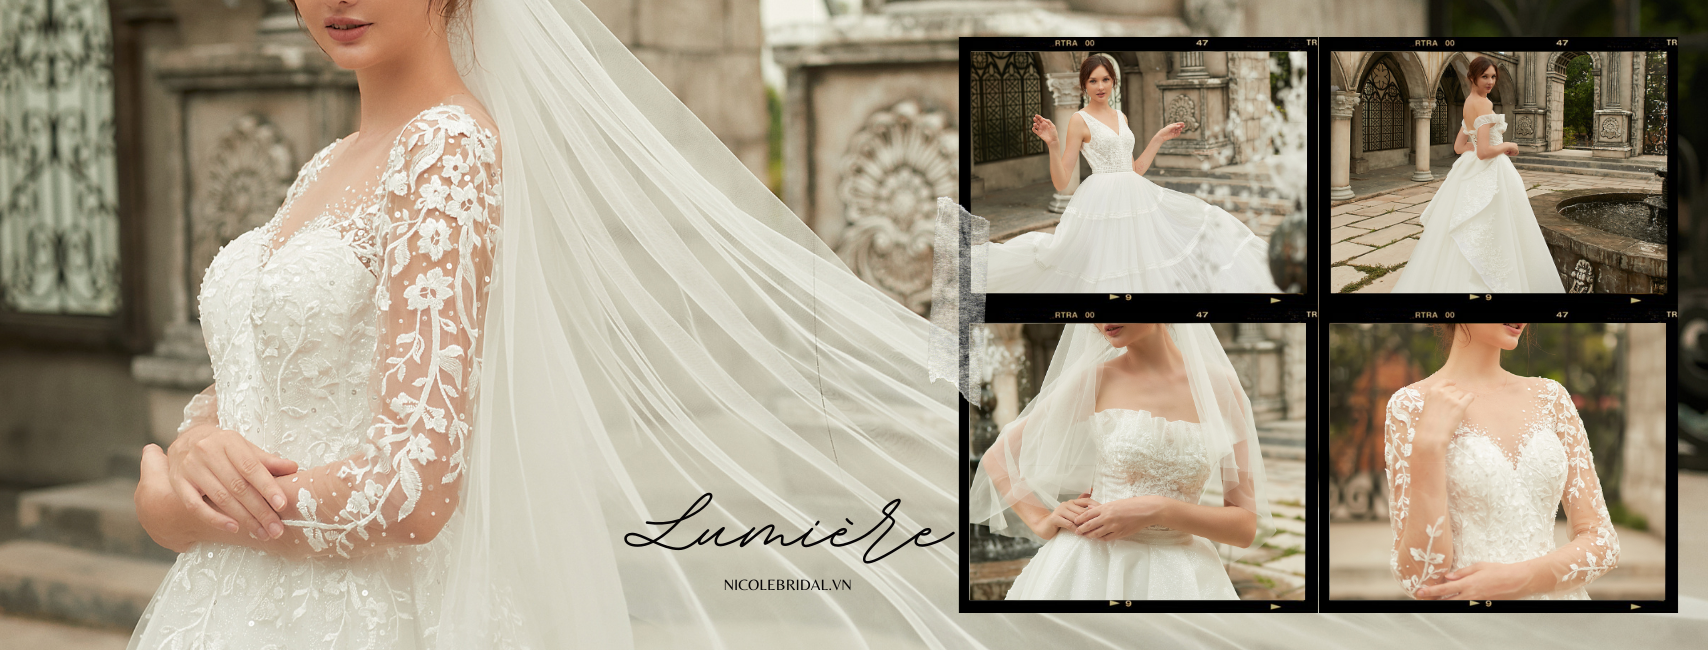 LUMIÈRE collection - Completely feminine and luxurious